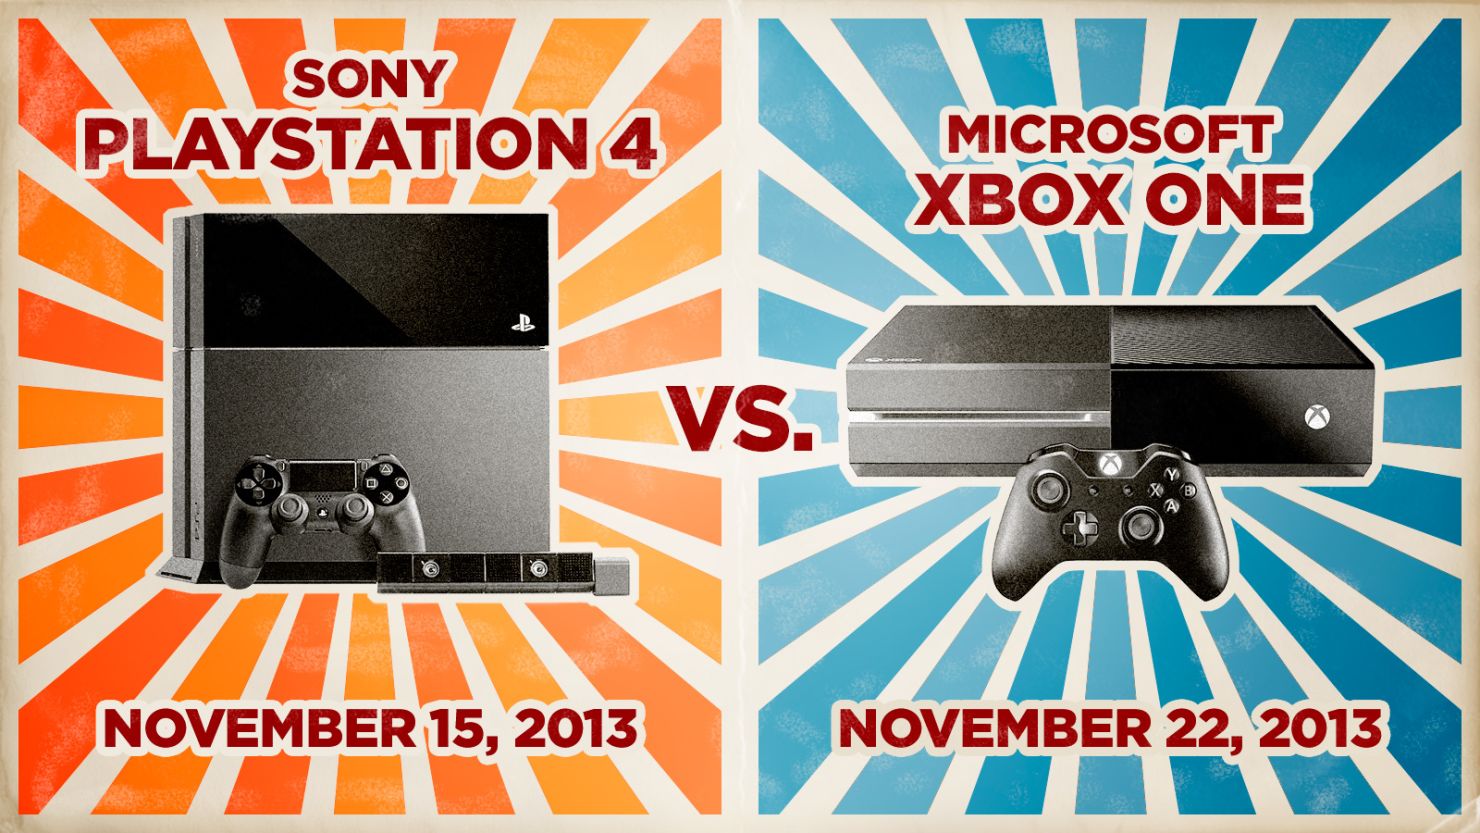 It's Sony versus Microsoft in a battle of new video game consoles hitting the market in the coming days.